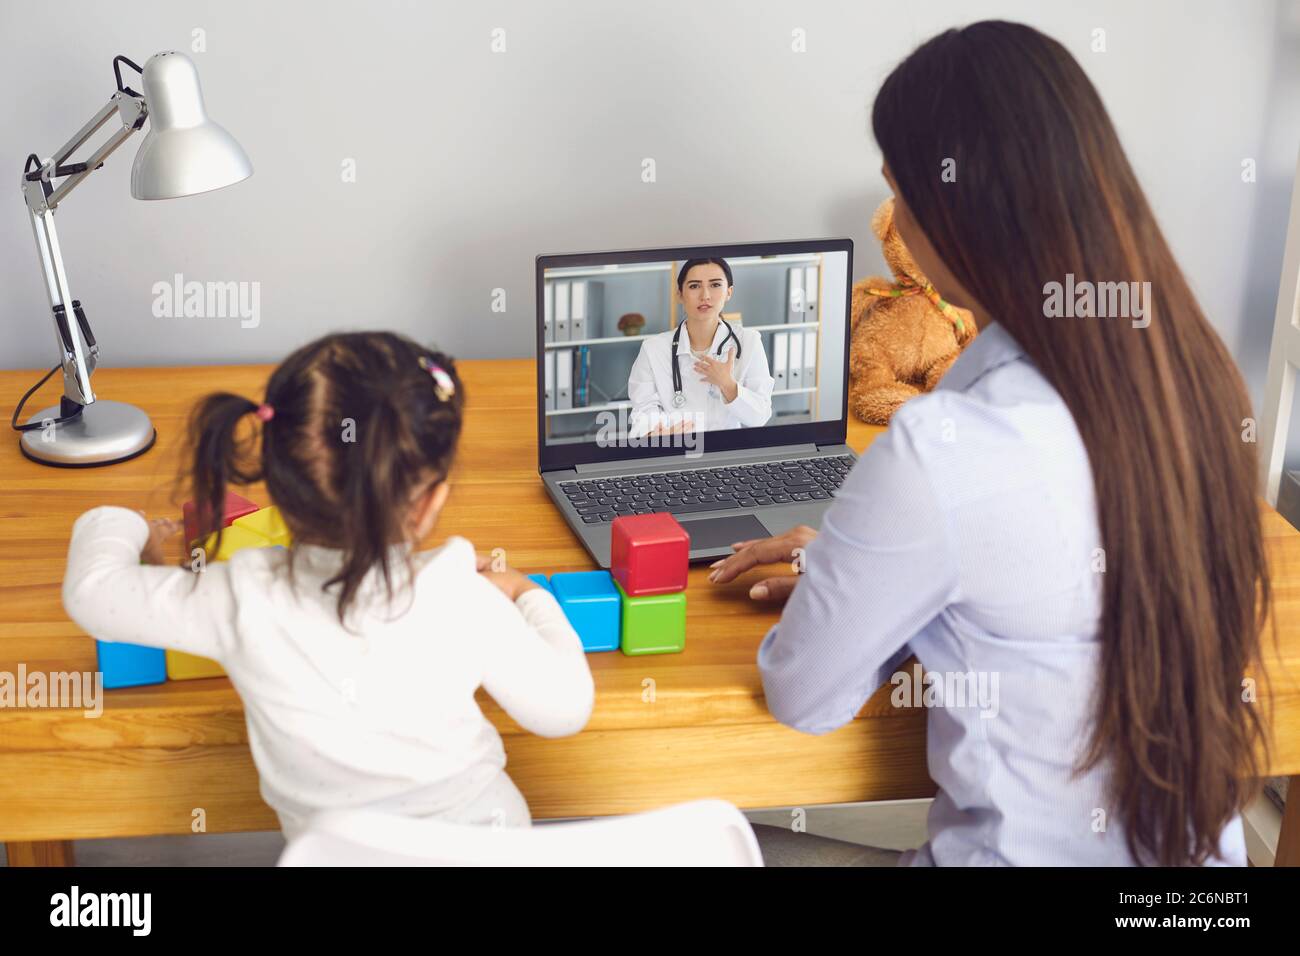 Family doctor online. Mom and daughter listen to the doctor consultation have a video conference in the room. Stock Photo